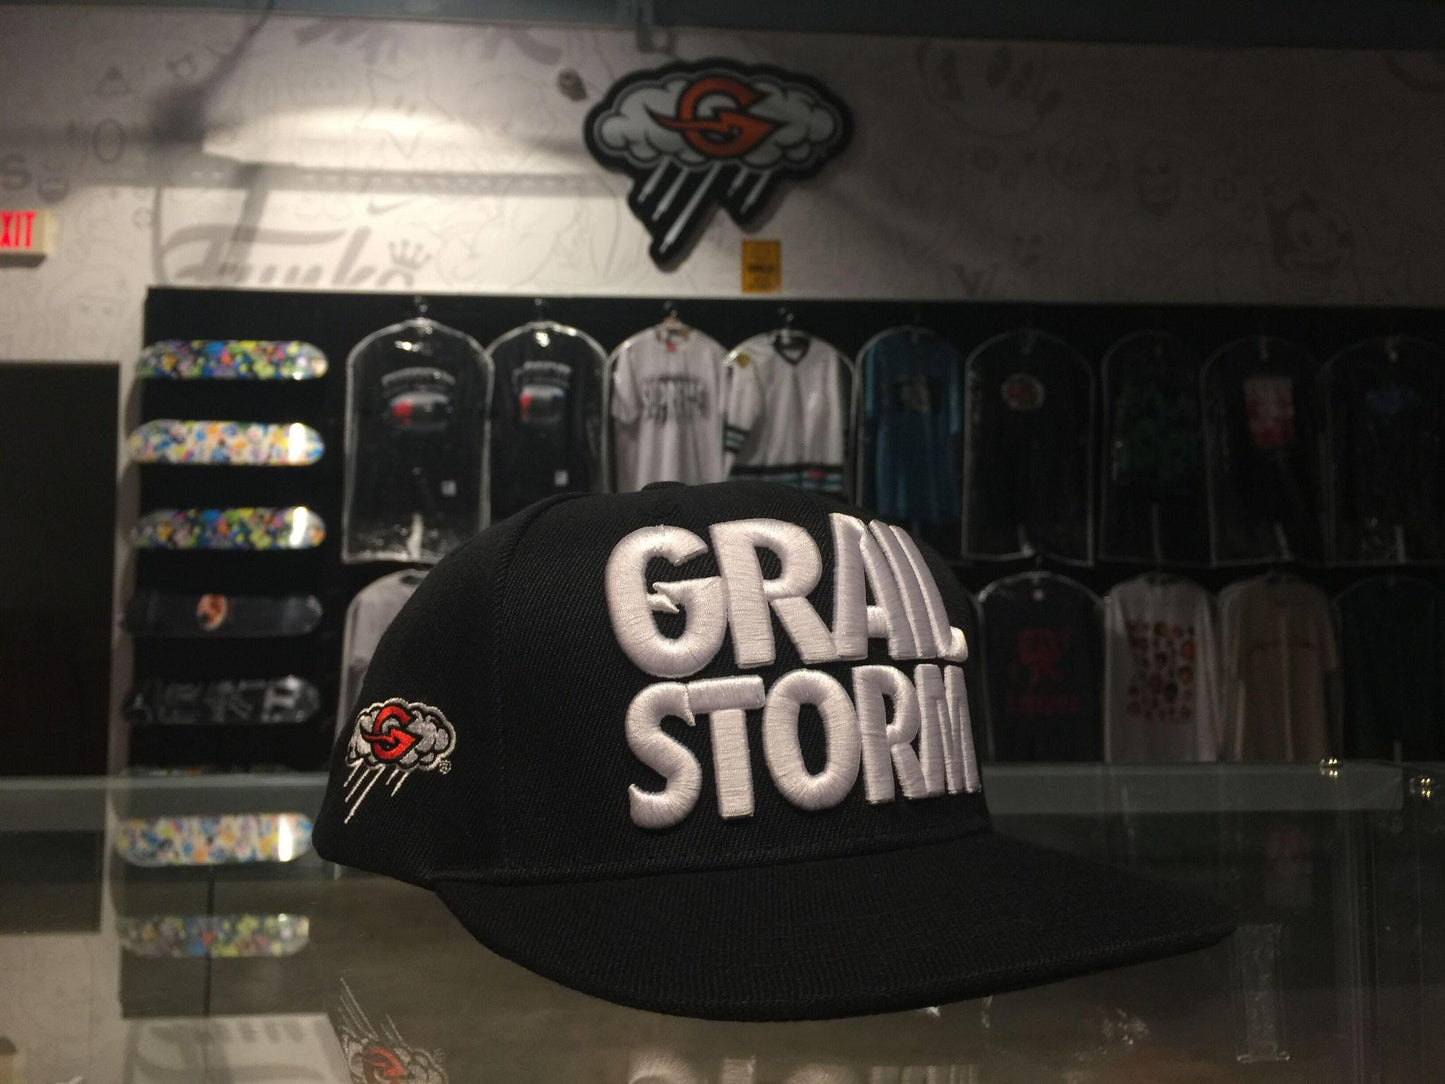 Grailstorm Embroidered Hats